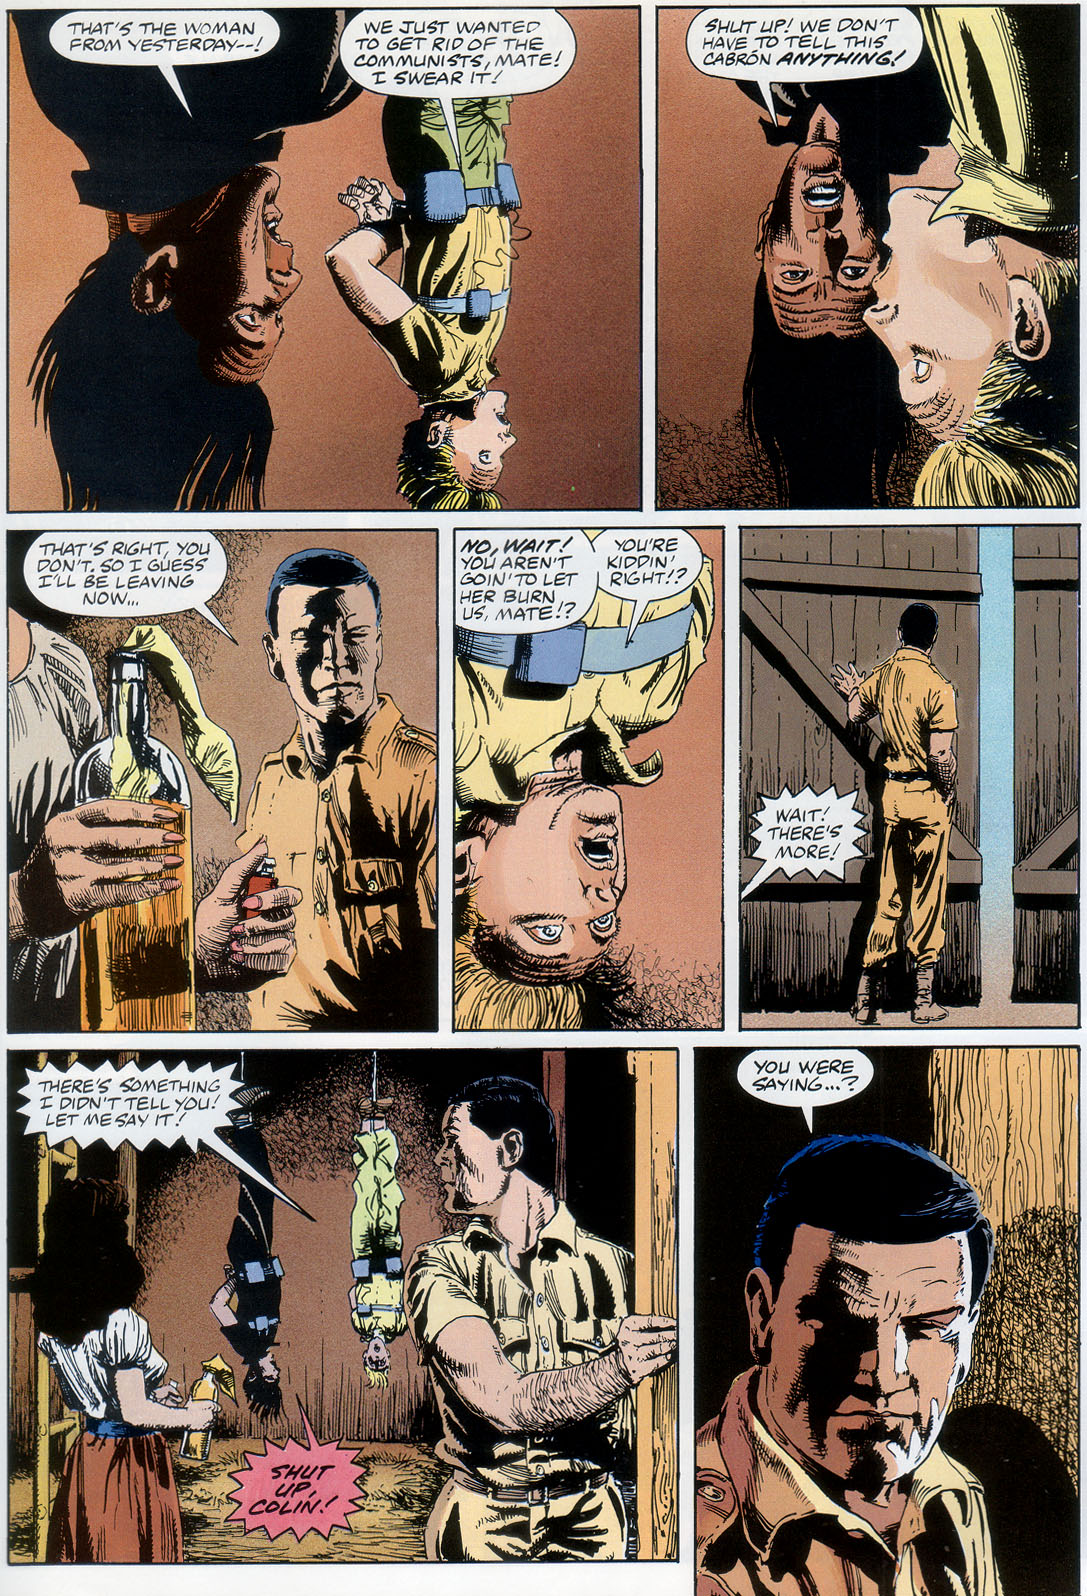 Marvel Graphic Novel issue 57 - Rick Mason - The Agent - Page 43